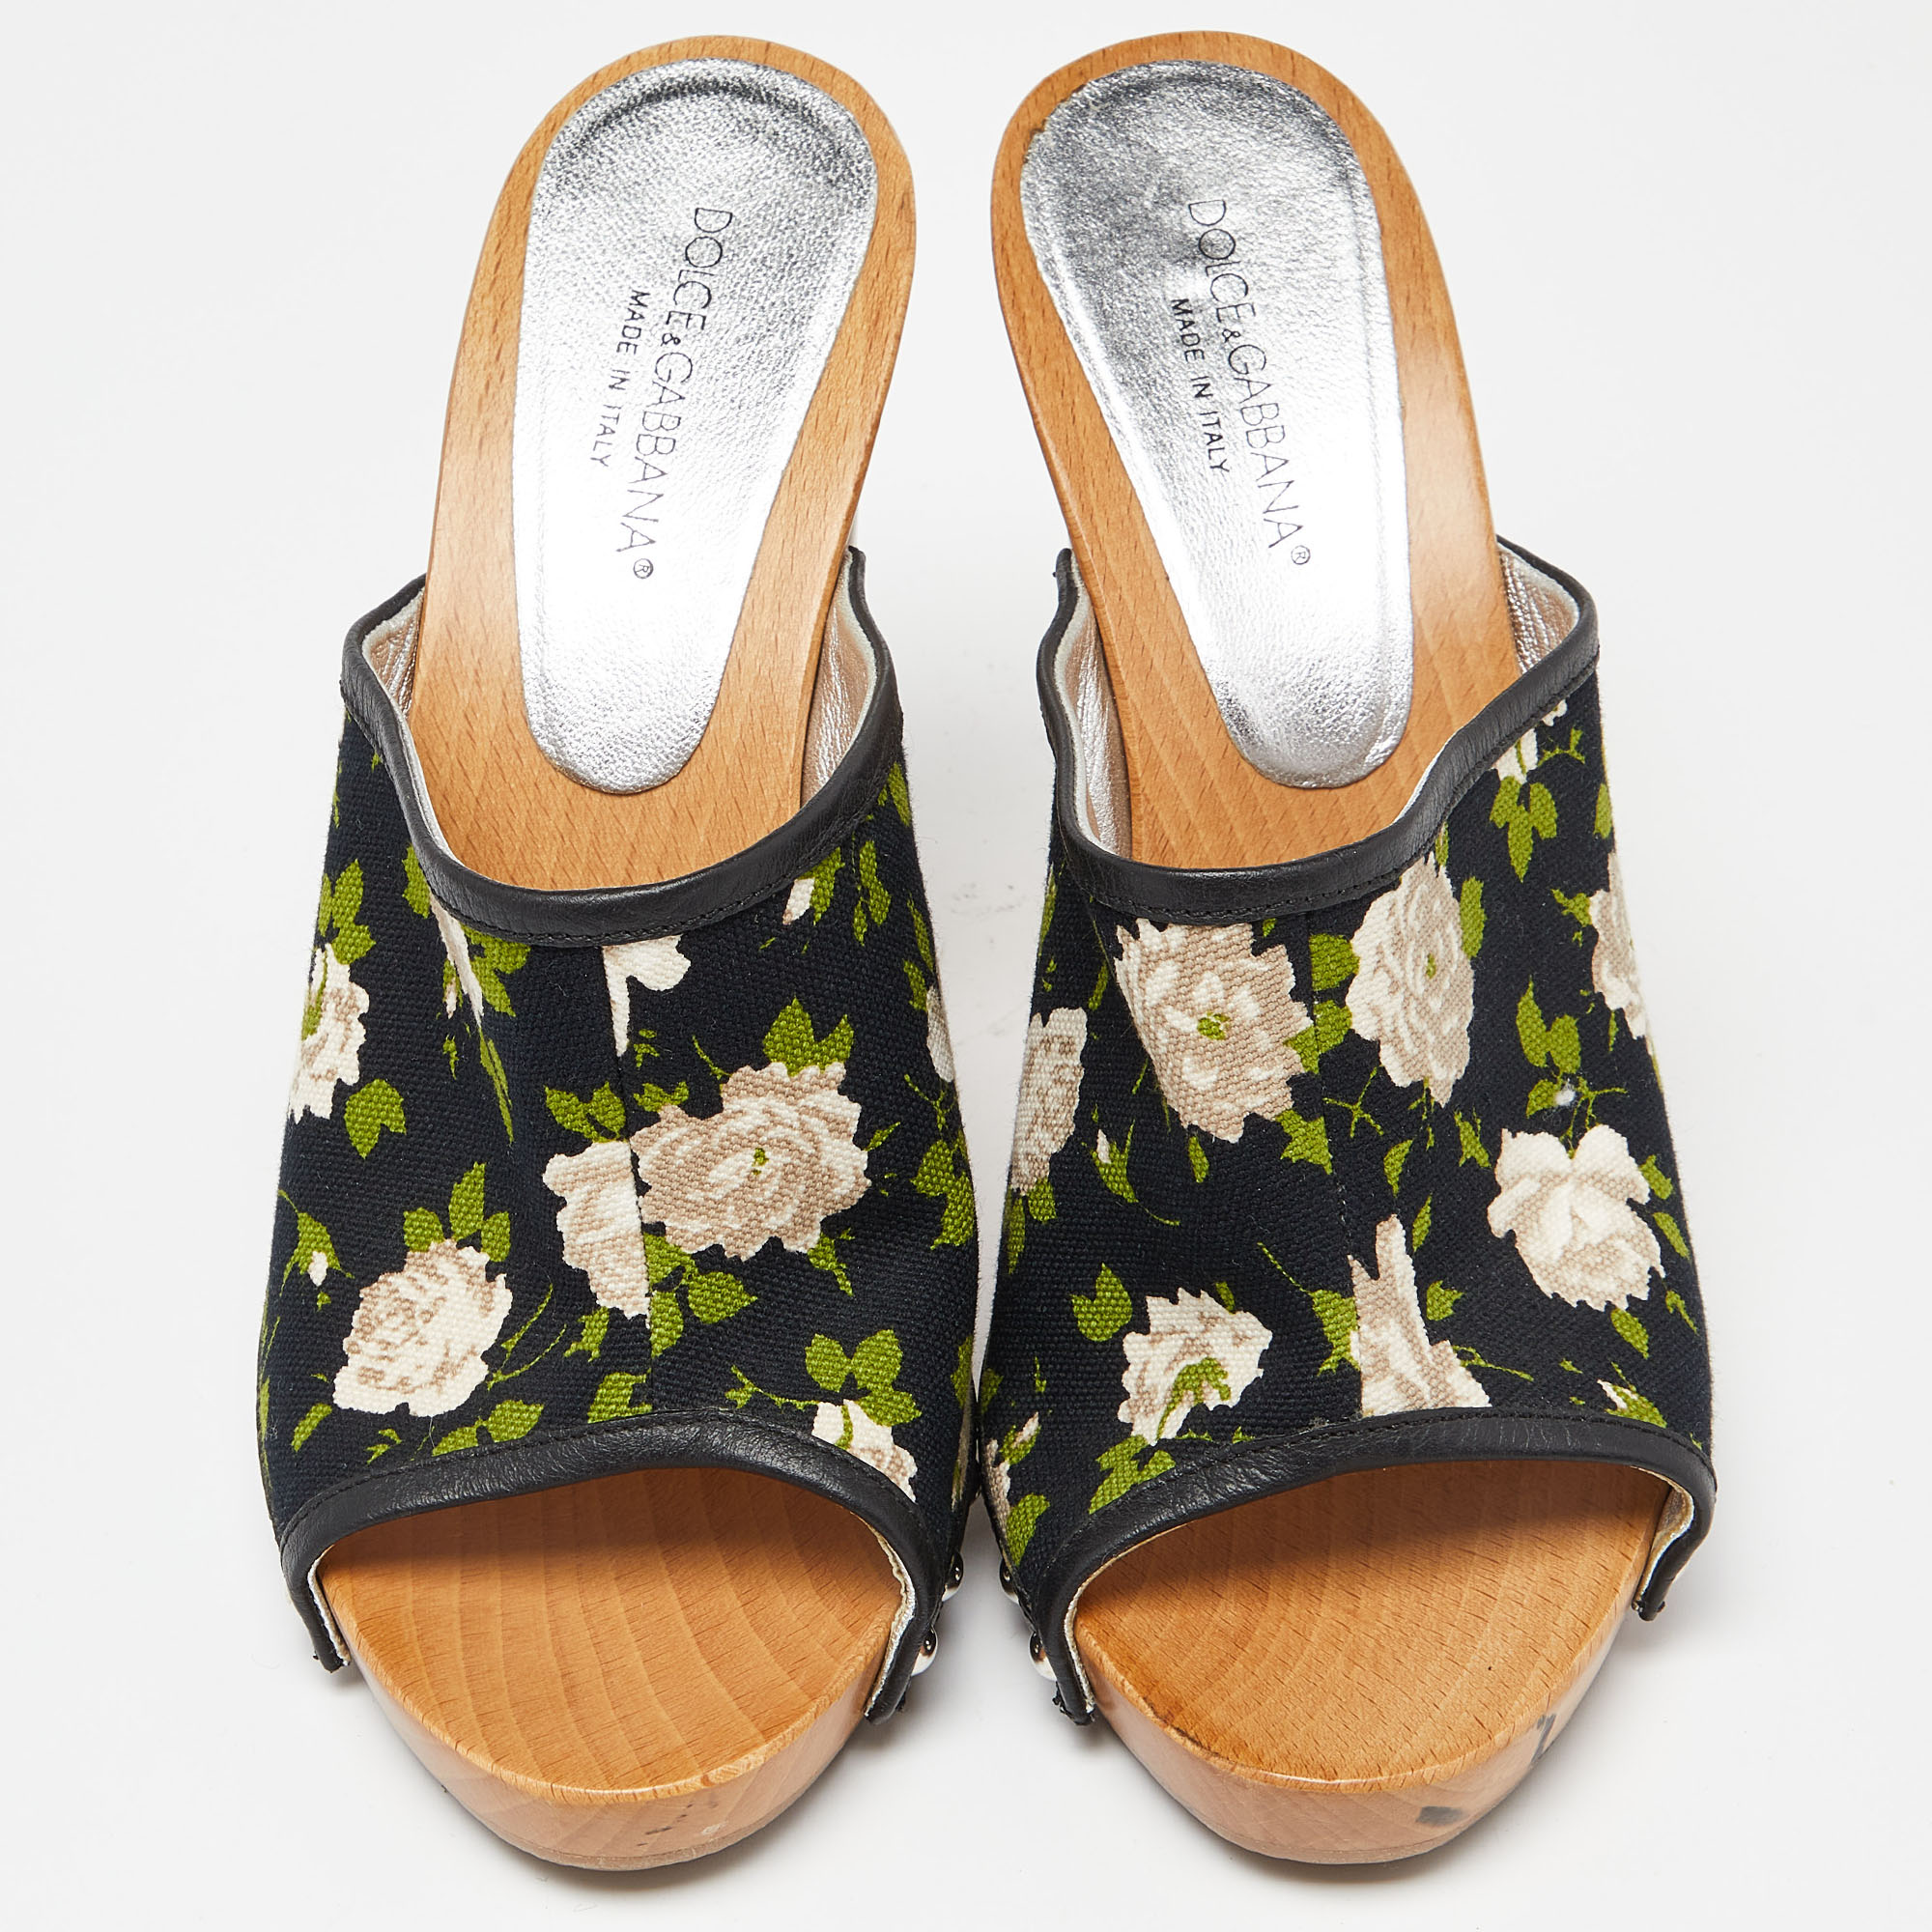 Dolce & Gabbana Mukticolor Floral Canvas And Leather Block Heel Mules Size 38